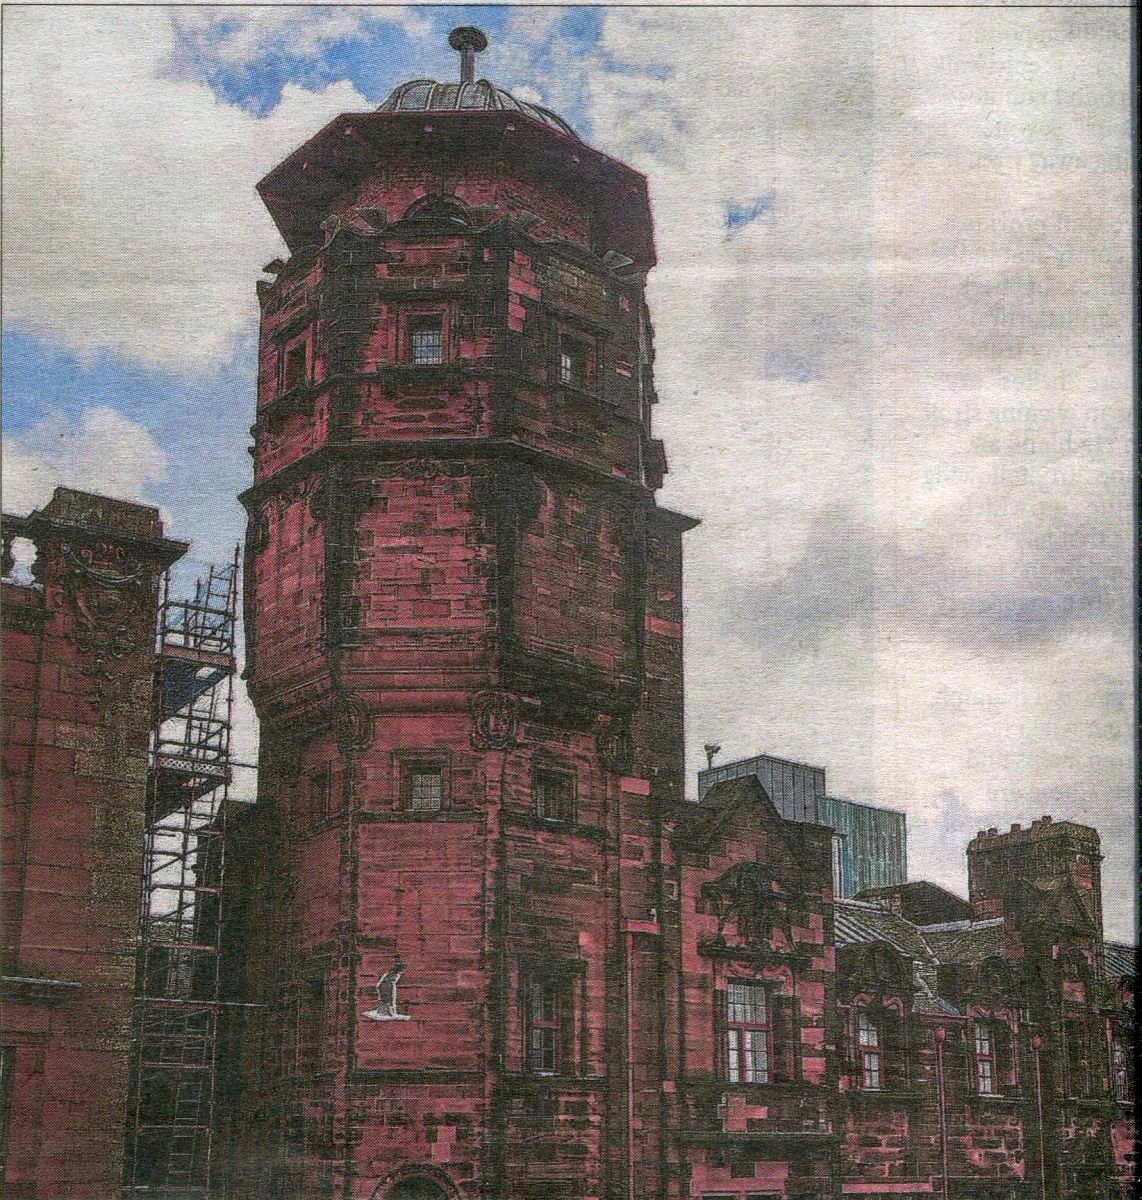 THE LIGHTHOUSE  / GLASGOW HERALD BUILDING